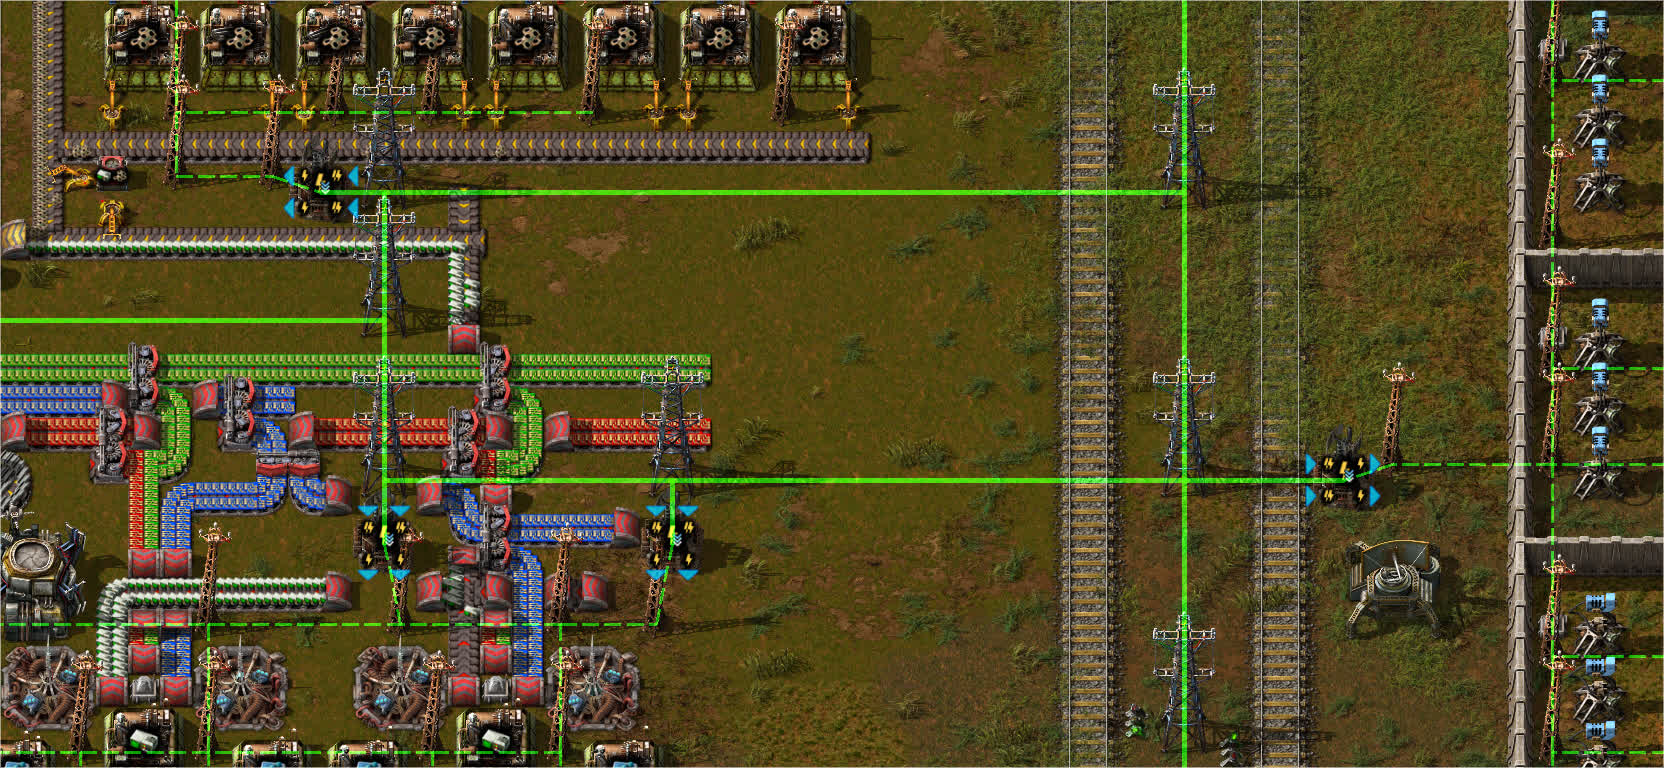 Example of main high voltage line (solid in-game overlay) with transformers stepping down the voltage to machines (dashed in-game overlay). This allows for simplistic power distribution.